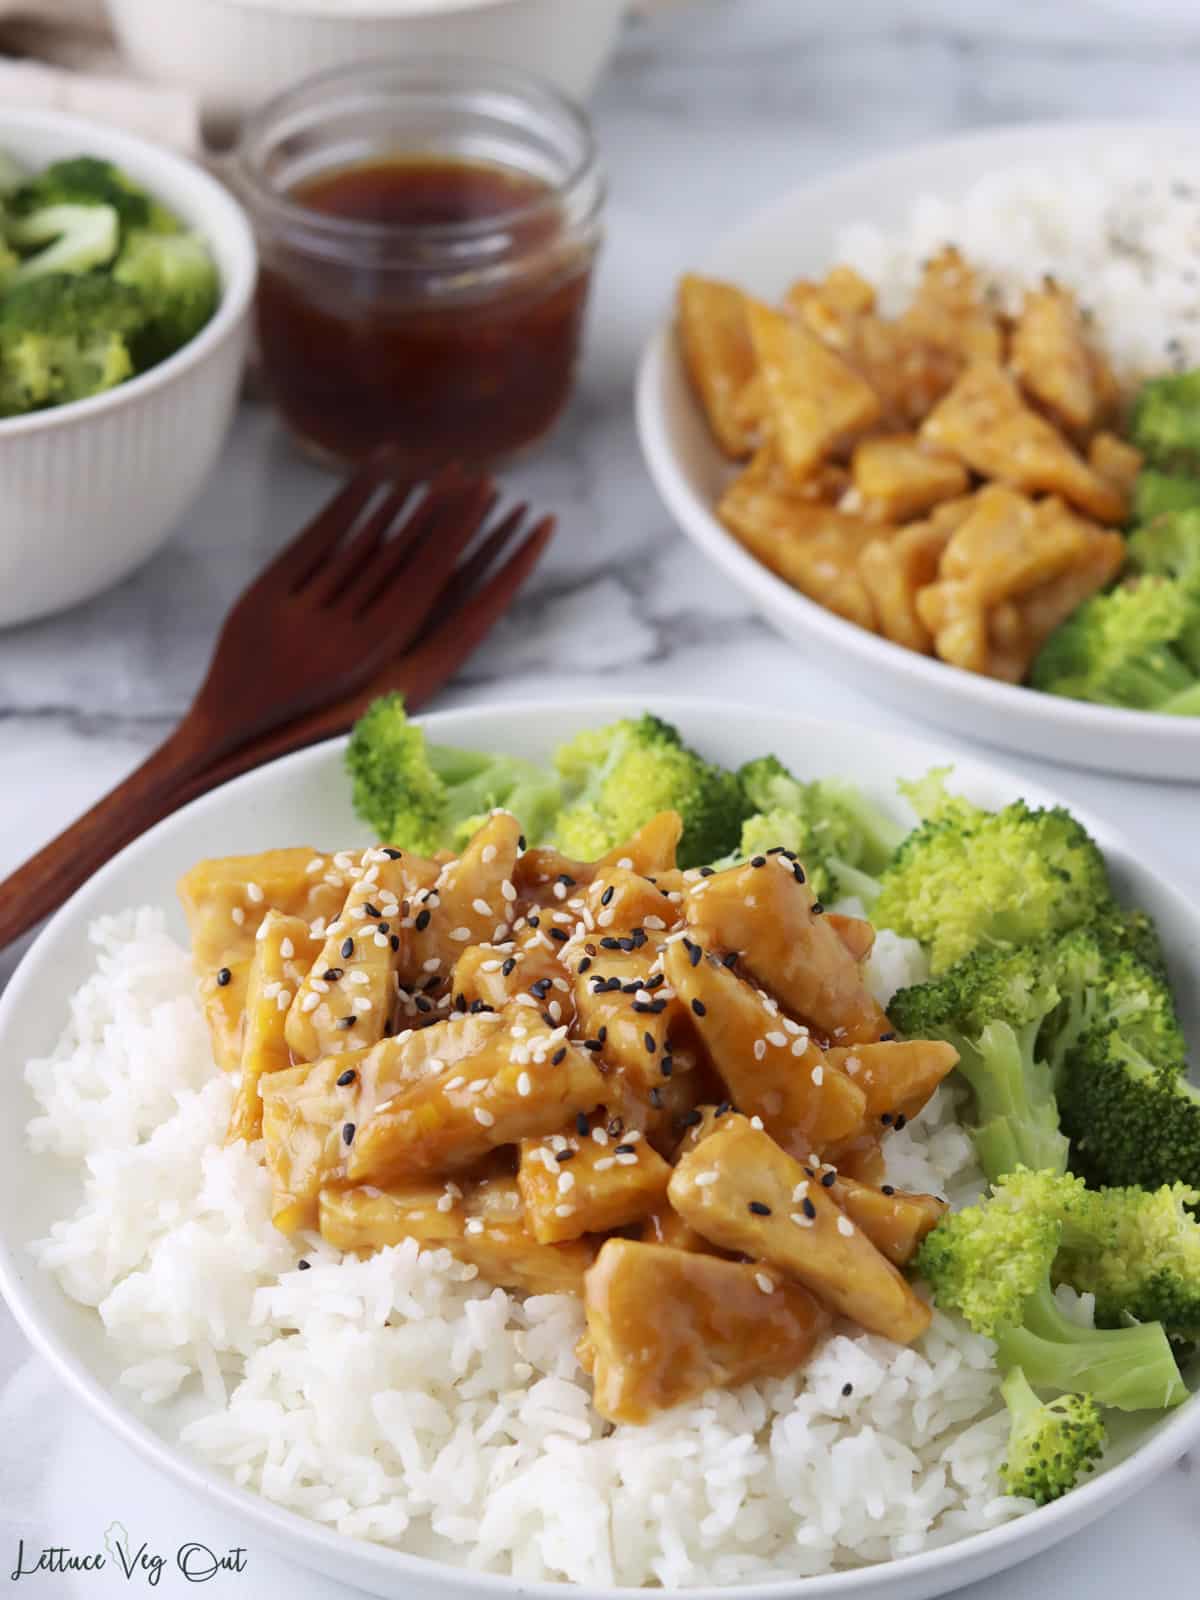 Plate of teriyaki tempeh over rice with broccoli and second plate blurred in back.